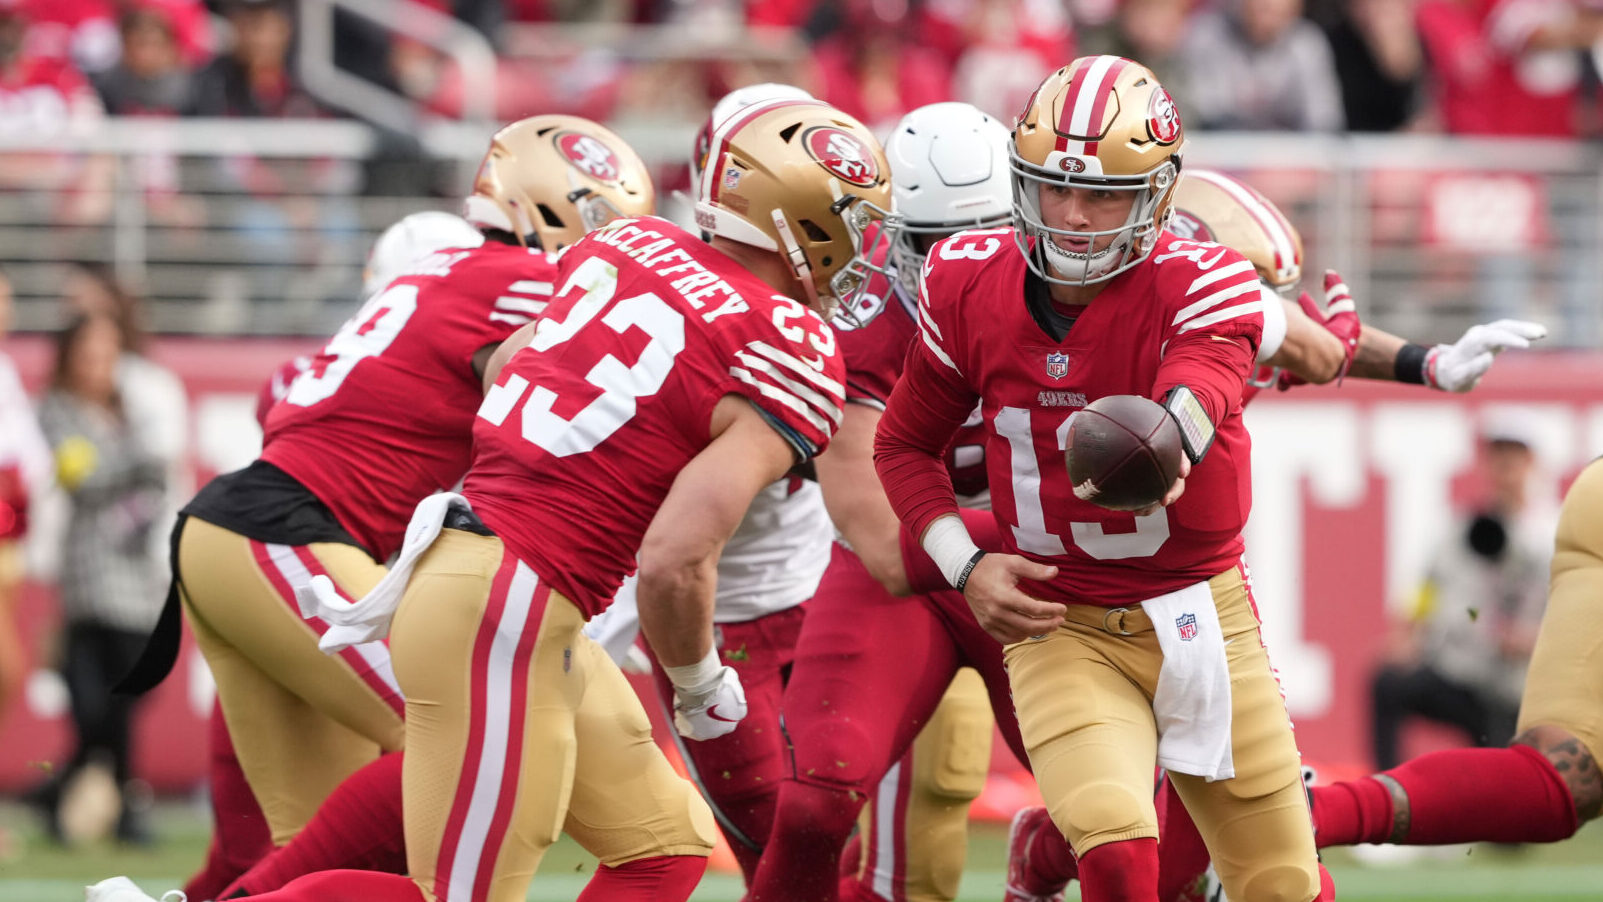 San Francisco 49ers favored to win against the Arizona Cardinals